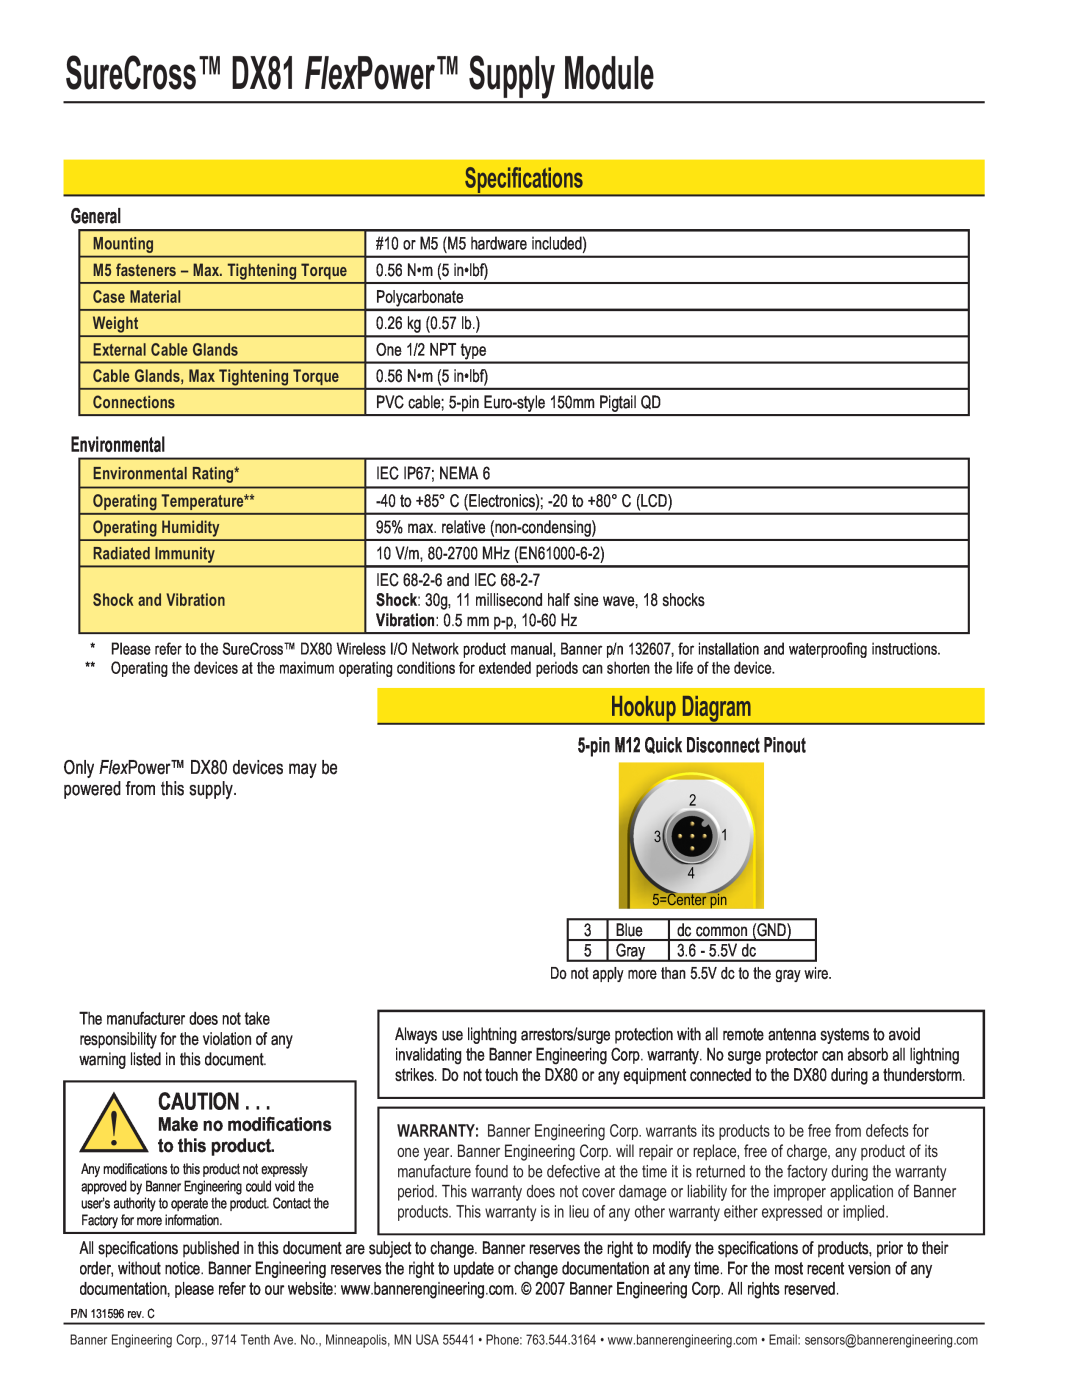 Banner DX81 manual Specifications, Hookup Diagram, General, Environmental, pin M12 Quick Disconnect Pinout 